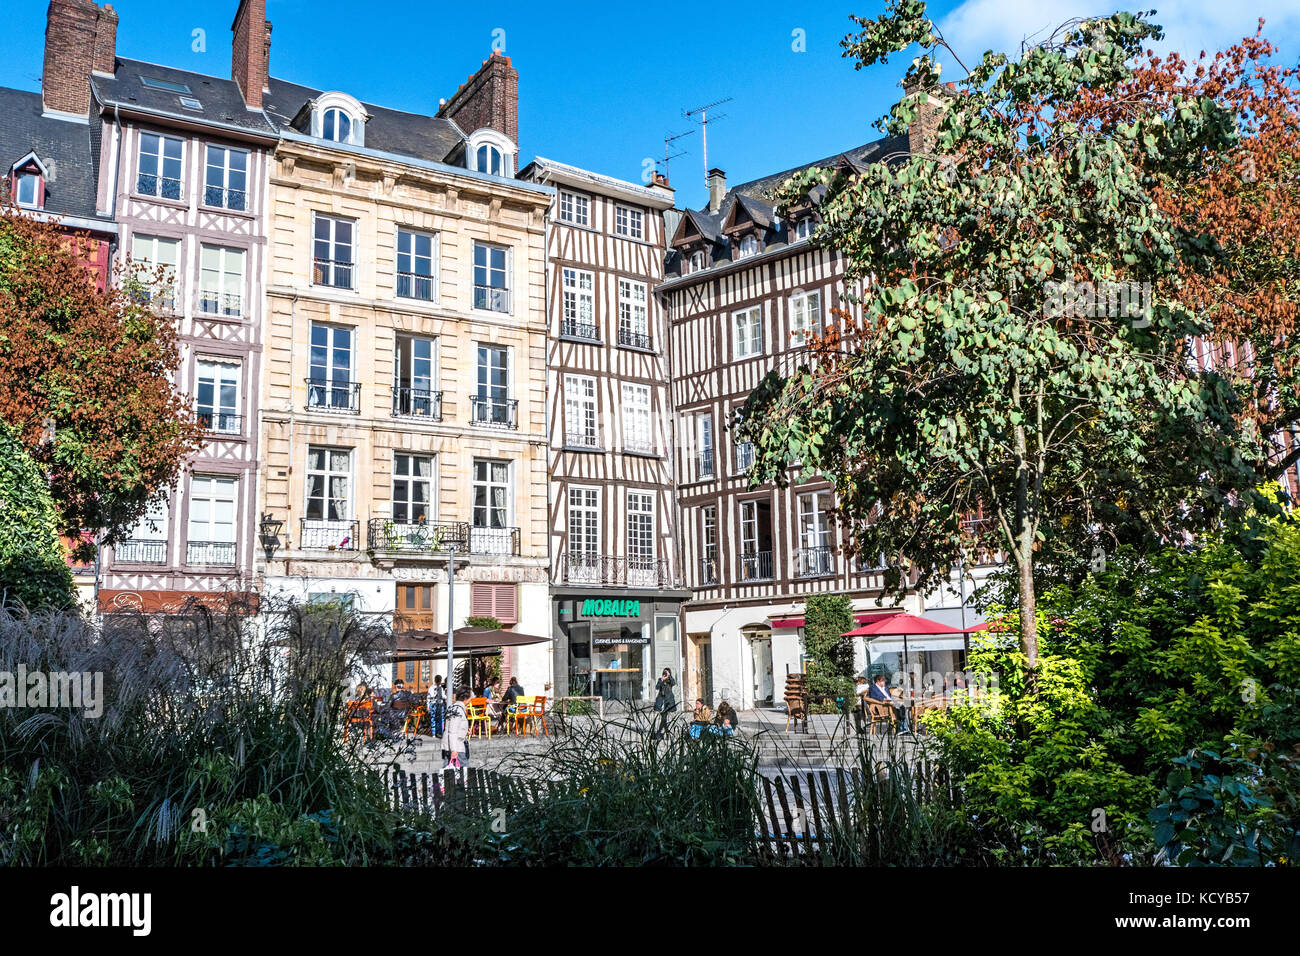 Rouen (Normandy, France): View on the town Stock Photo